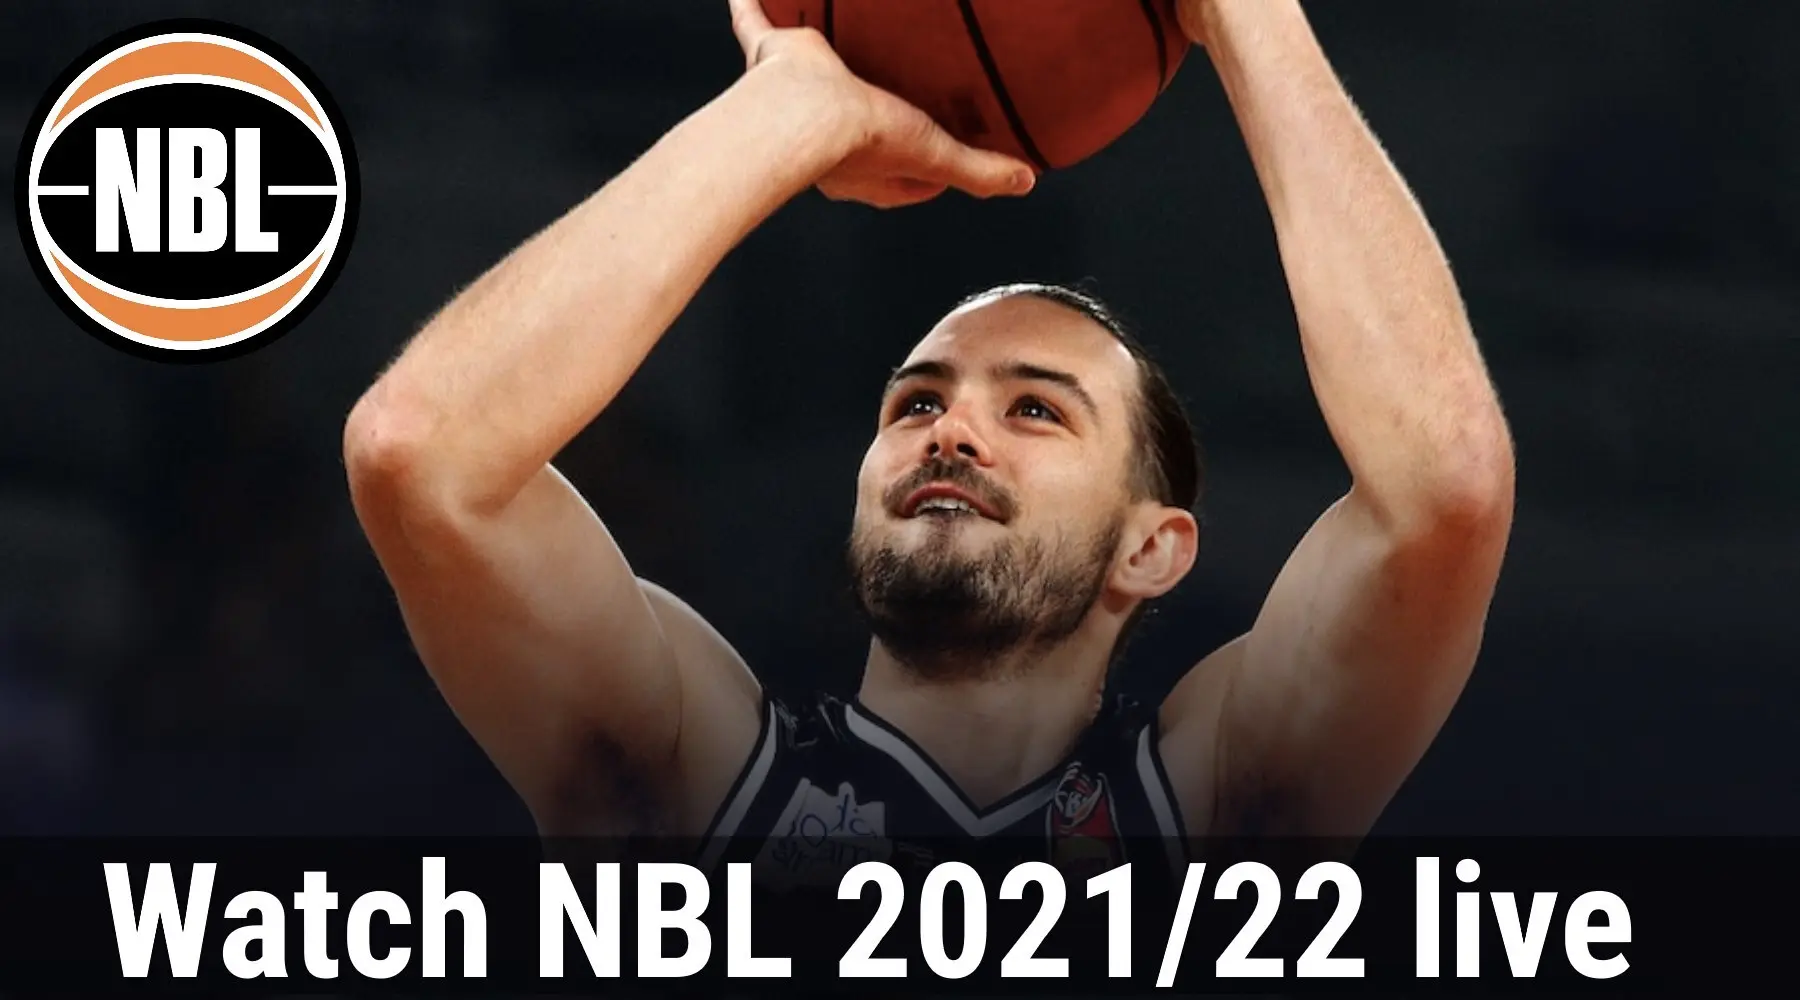 nbl live streaming